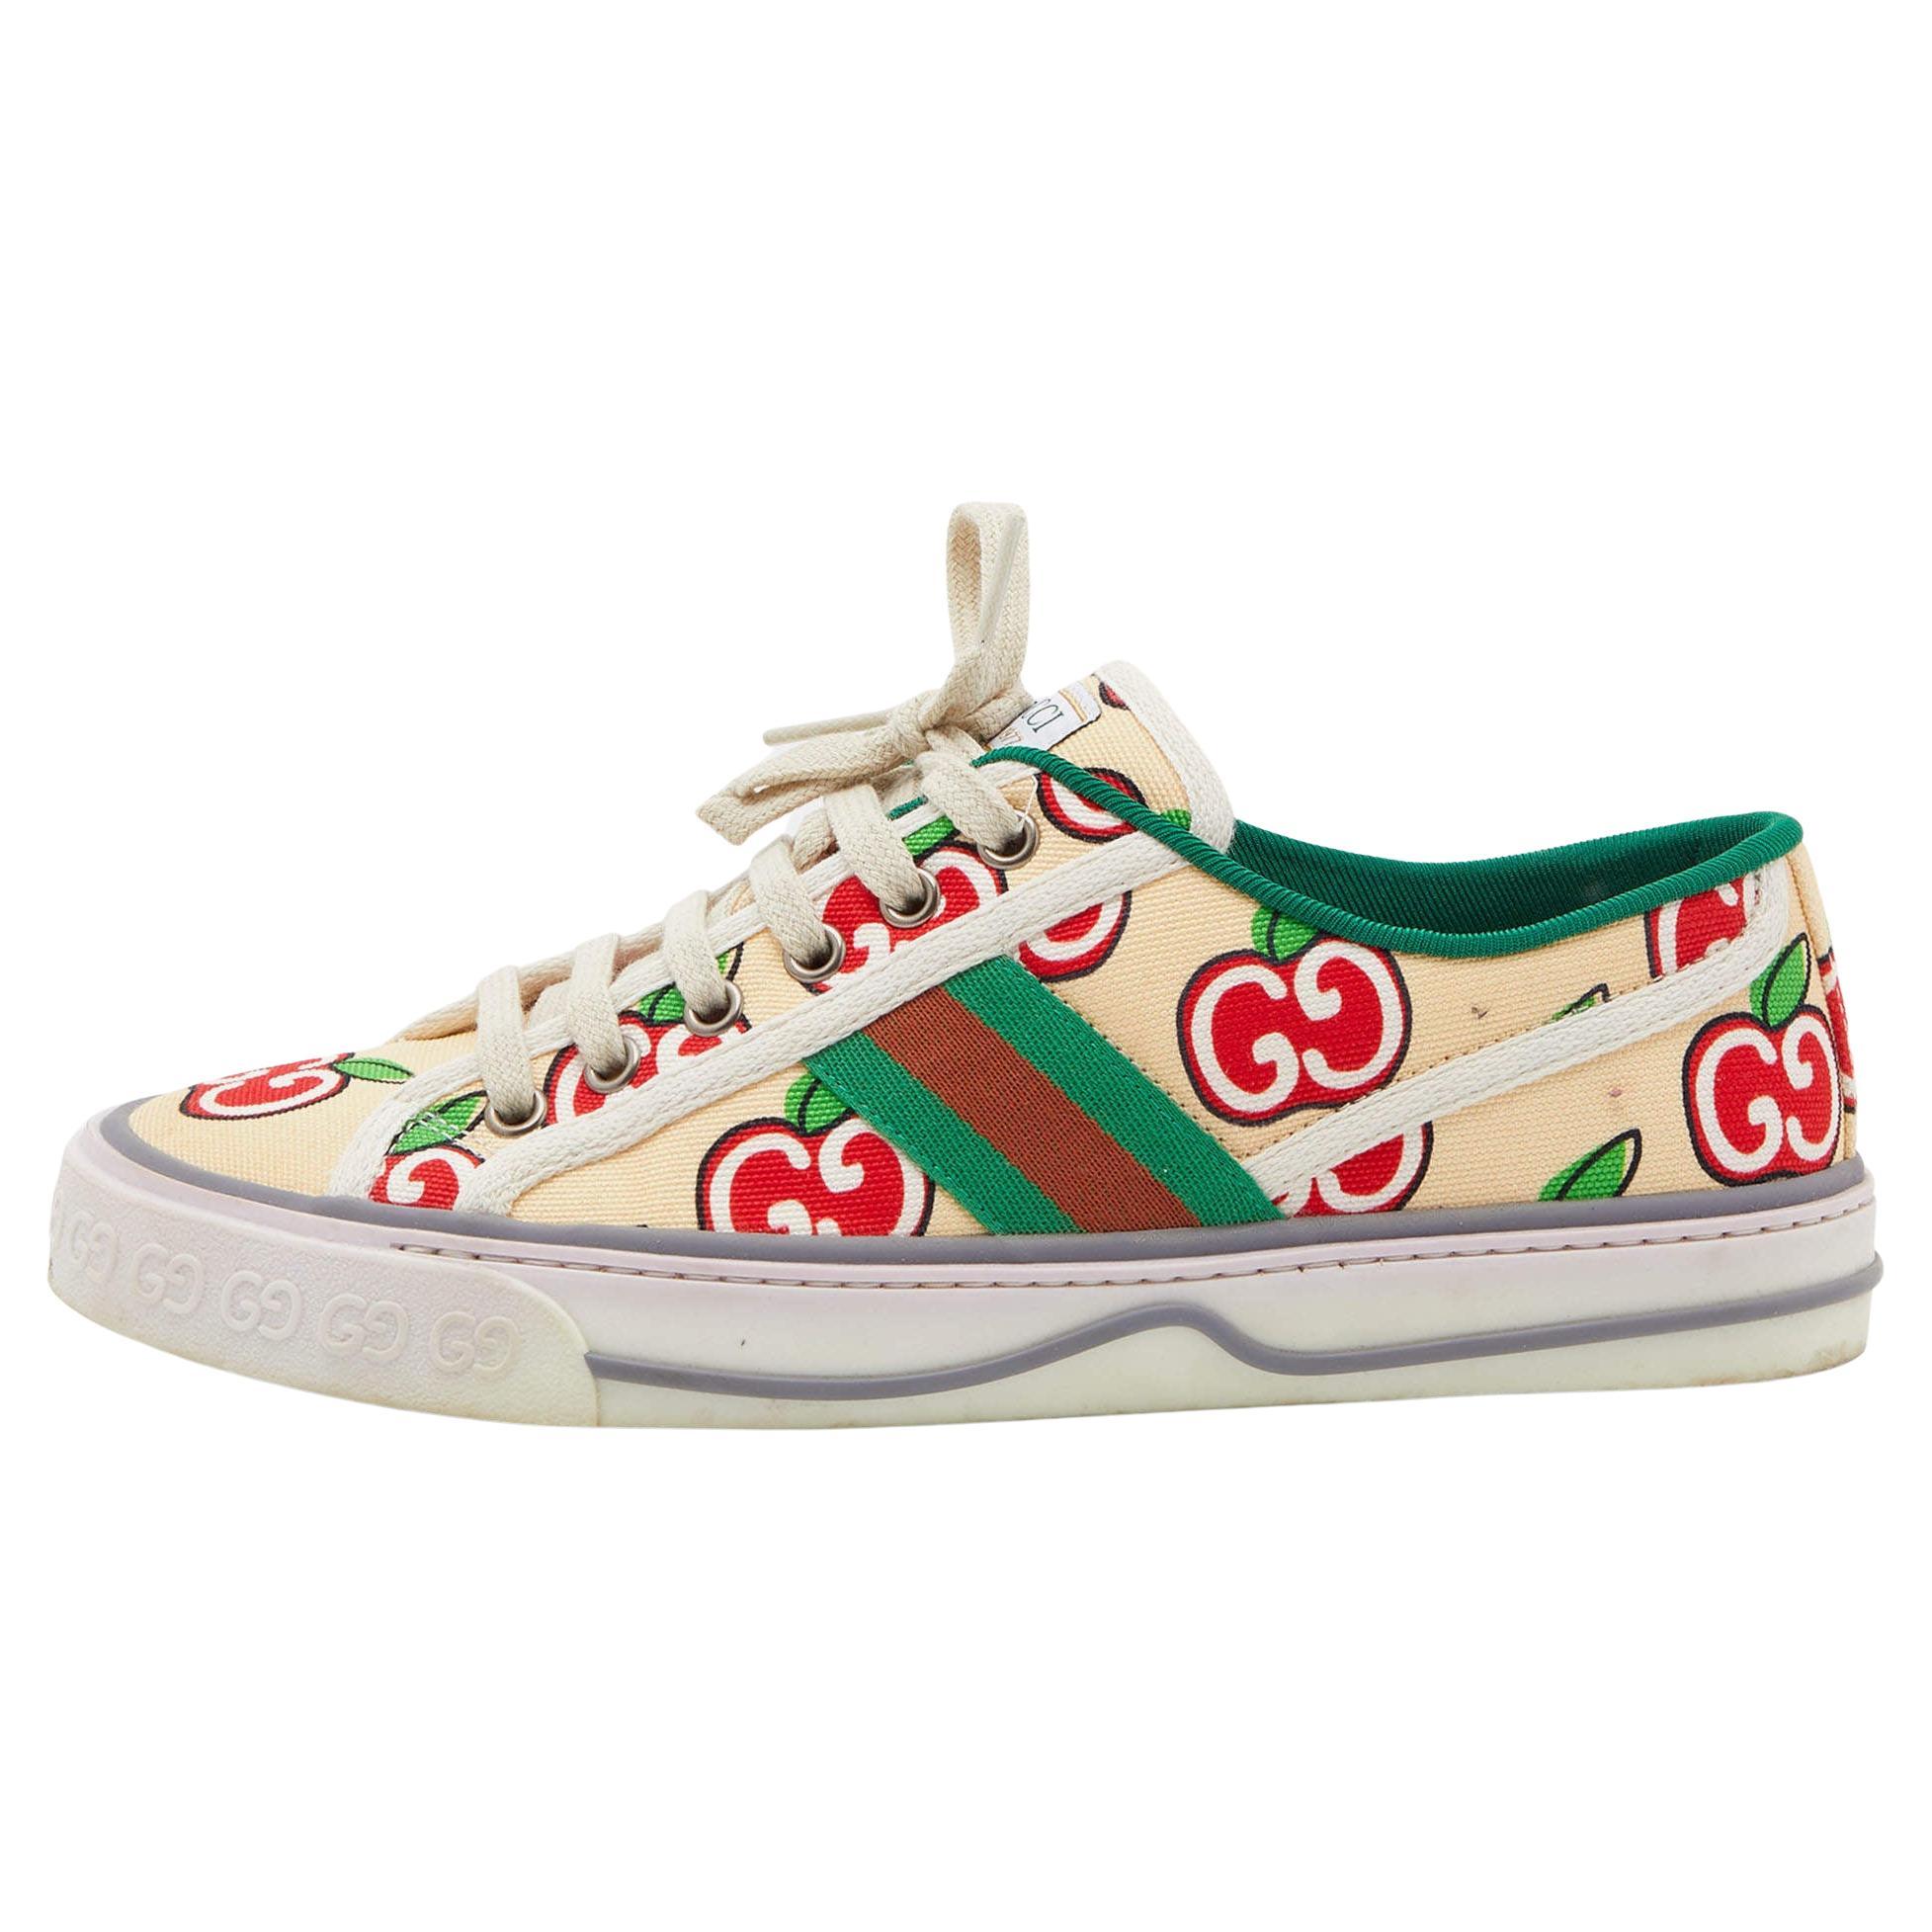 Gucci Multicolor Canvas Tennis 1977 GG Apple Print Low Top Sneakers Size 38